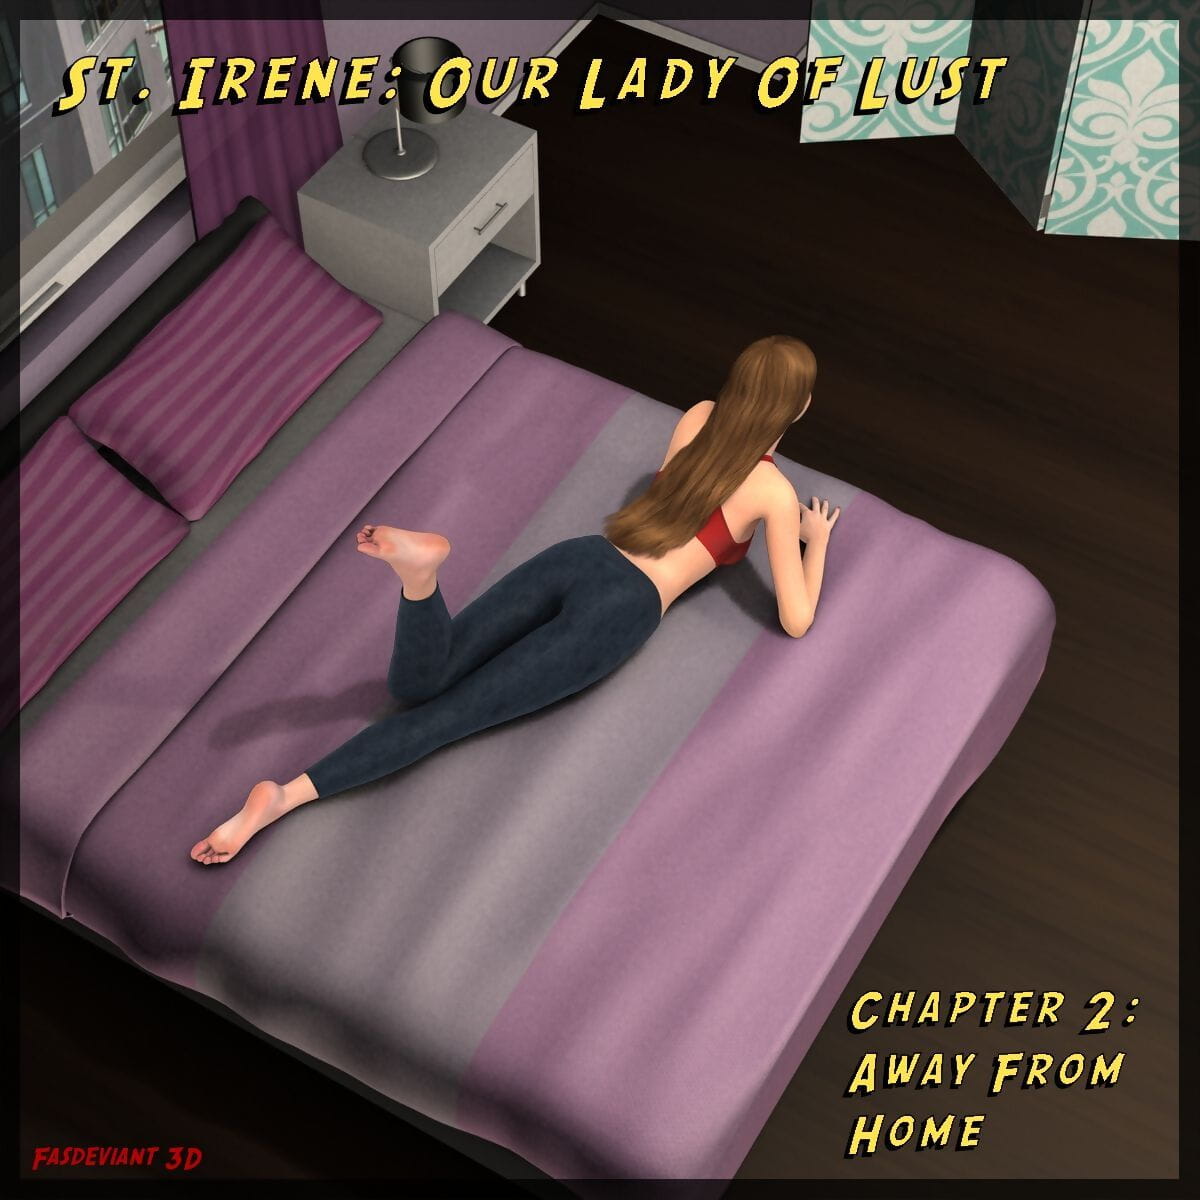 Fasdeviant St. Irene: Our Lady of Lust - Chapter 2: Away From Home